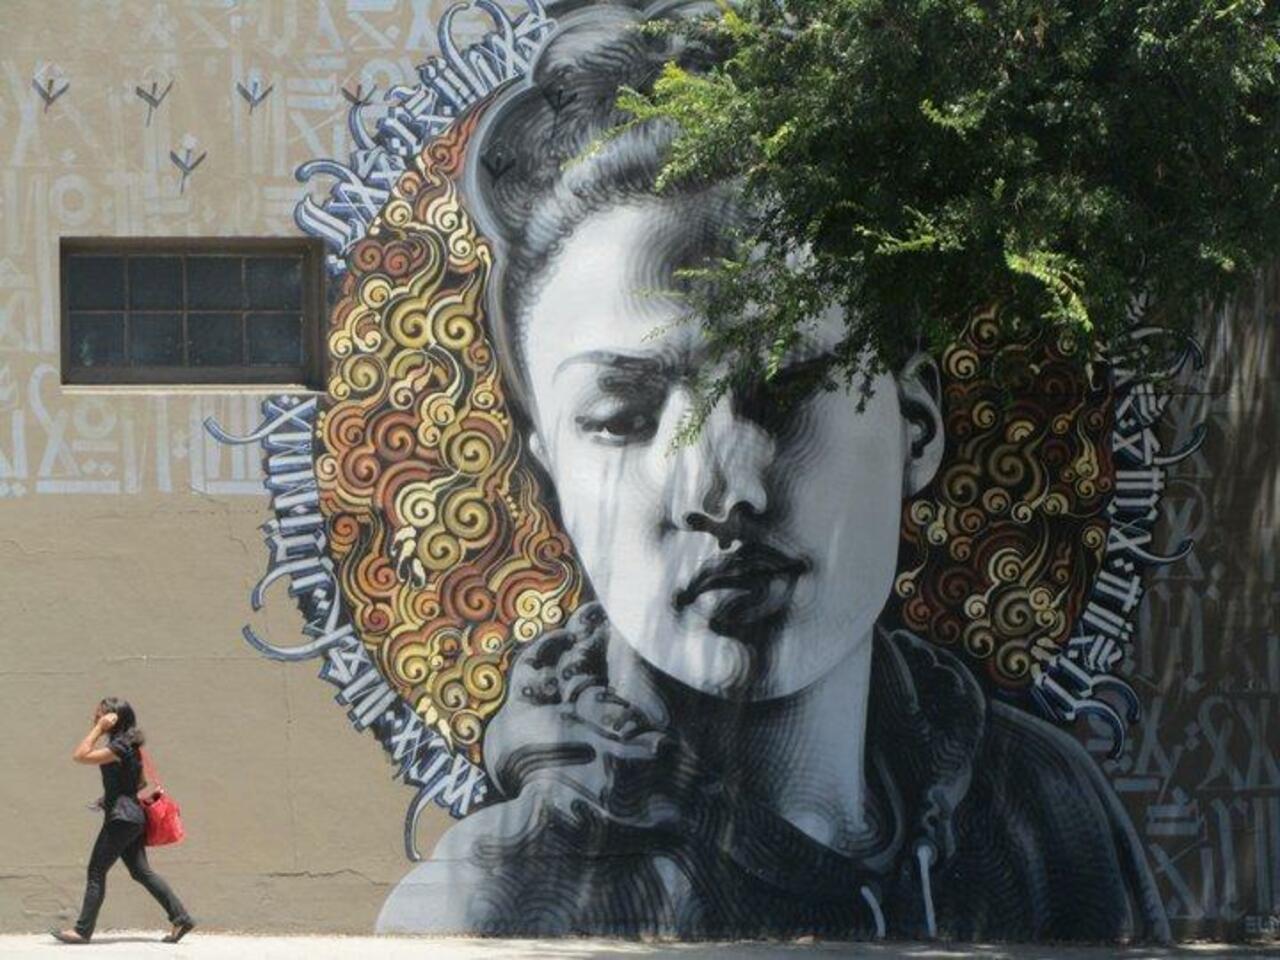 Truly beautiful work. Check out more amazing art in our gallery: http://bit.ly/1uRmVhJ #streetart #graffiti https://t.co/cCwWnVuNg5